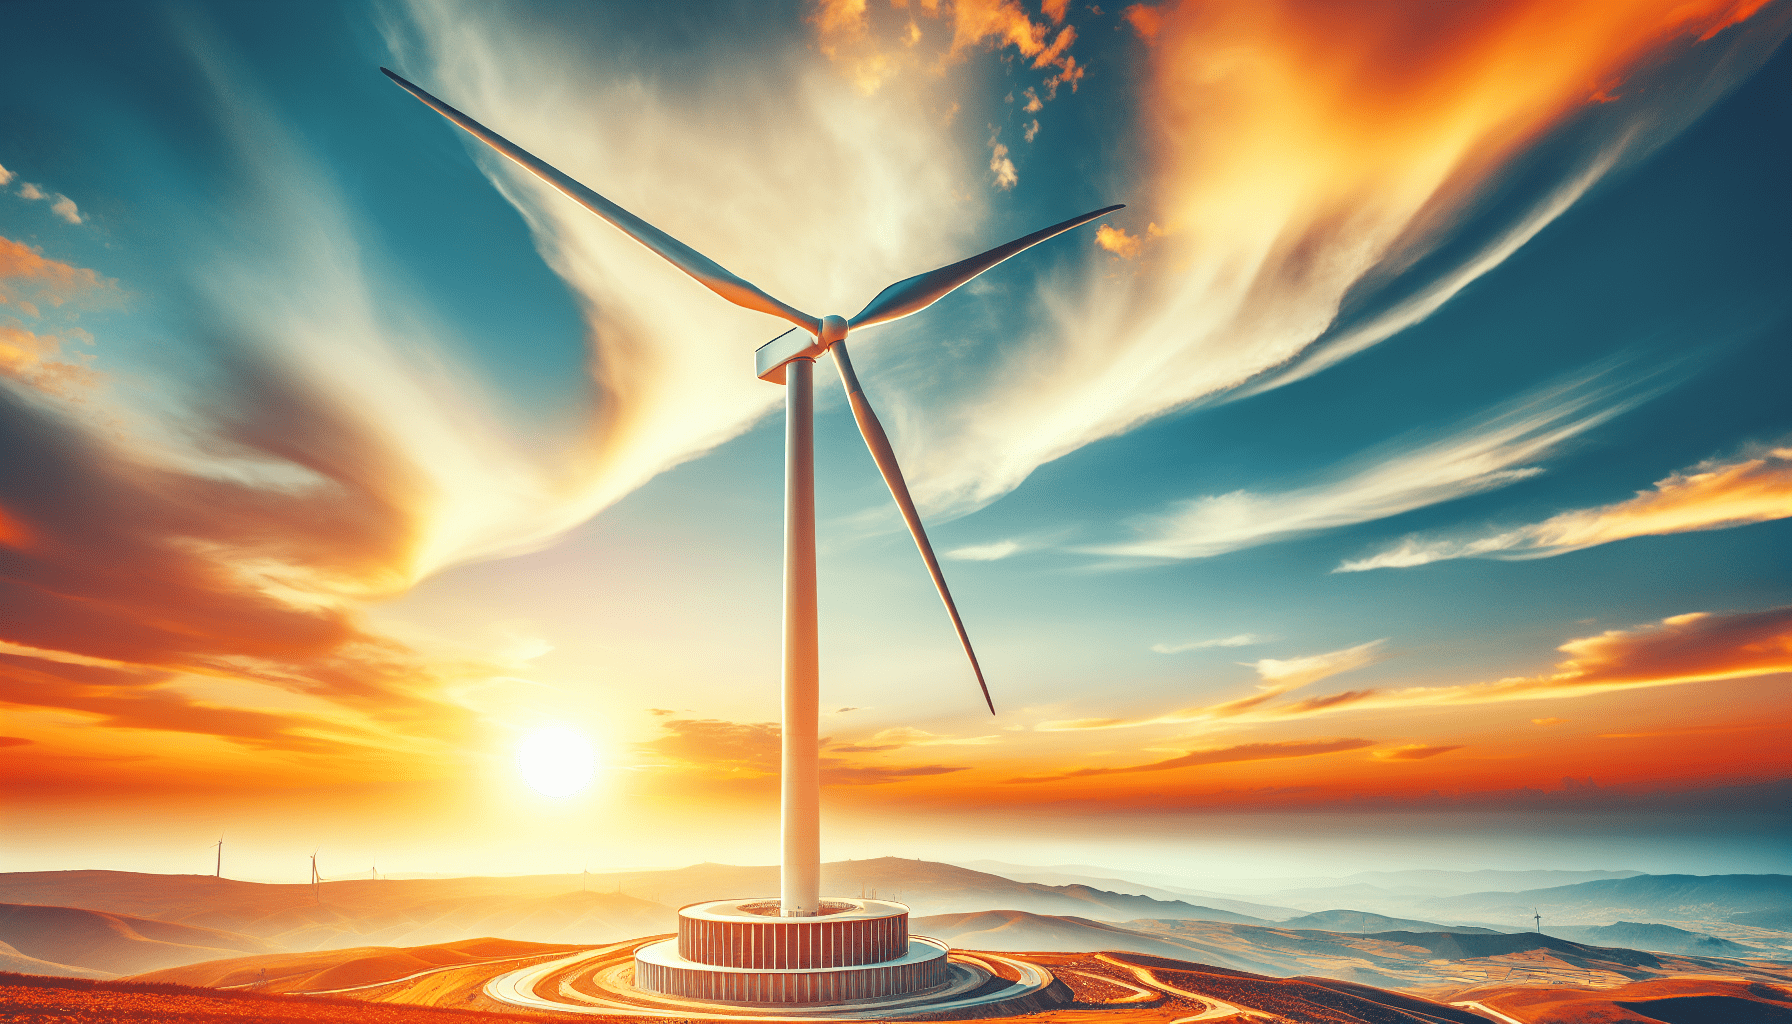 A large wind turbine stands against a vibrant sunset backdrop in Turkey, with swirling clouds and distant hills in the background.